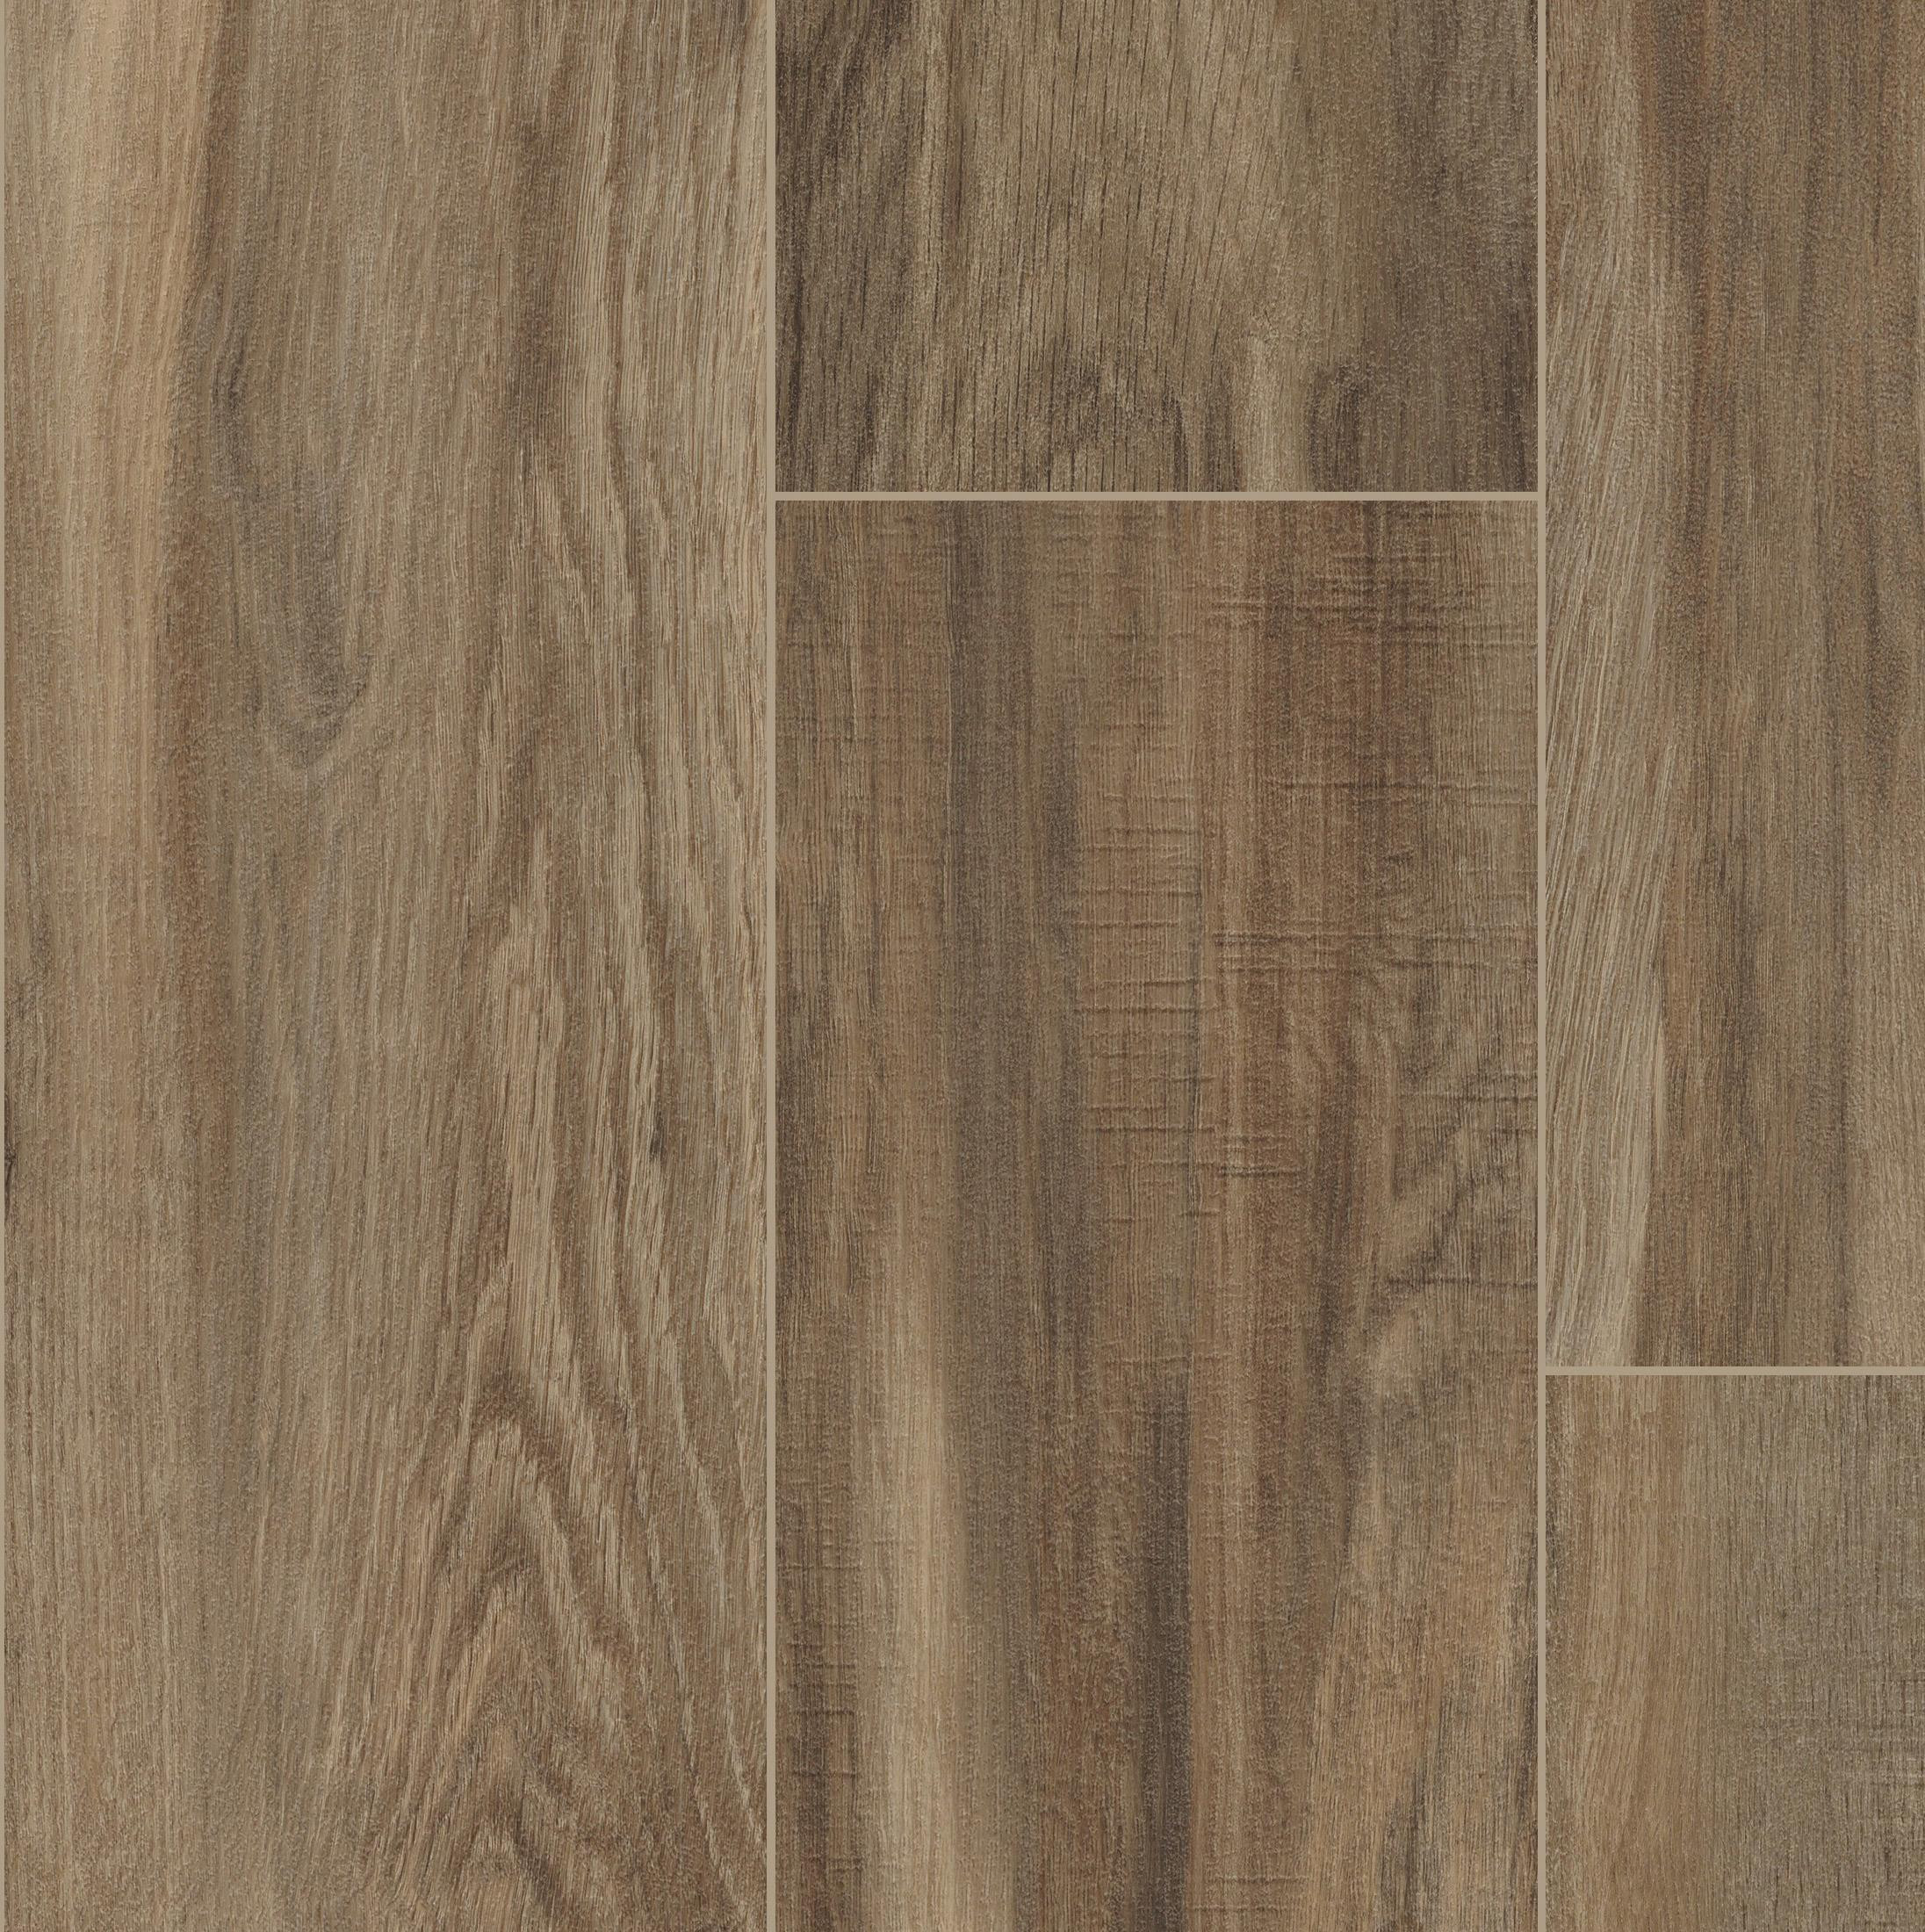 24 Perfect 3 8 Inch Hardwood Flooring 2024 free download 3 8 inch hardwood flooring of mohawk amber 9 wide glue down luxury vinyl plank flooring with 330 8 78 x 70 55 approved